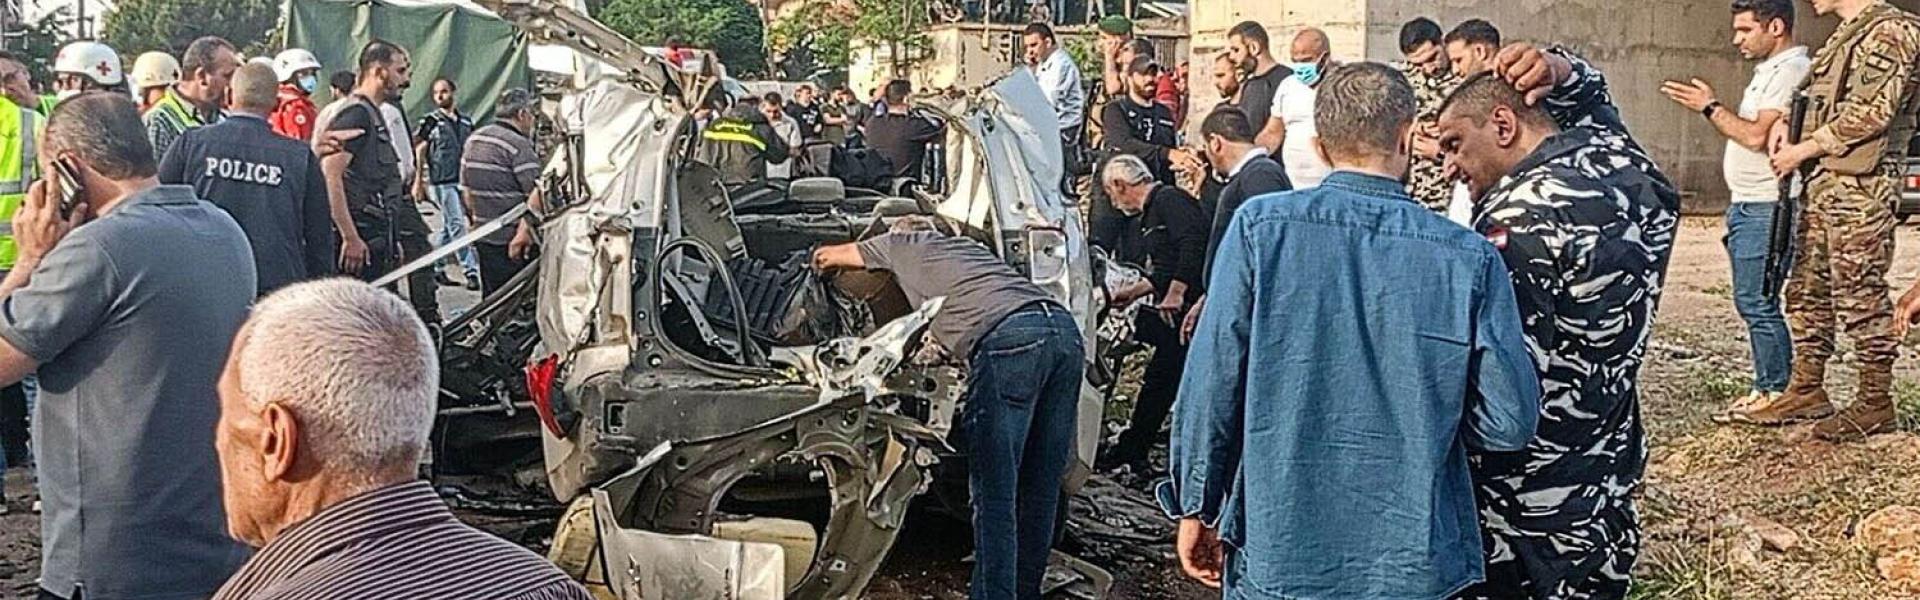 Lebanese army soldiers and onlookers gather around the carcasses of a car after it was hit by an Israeli strike